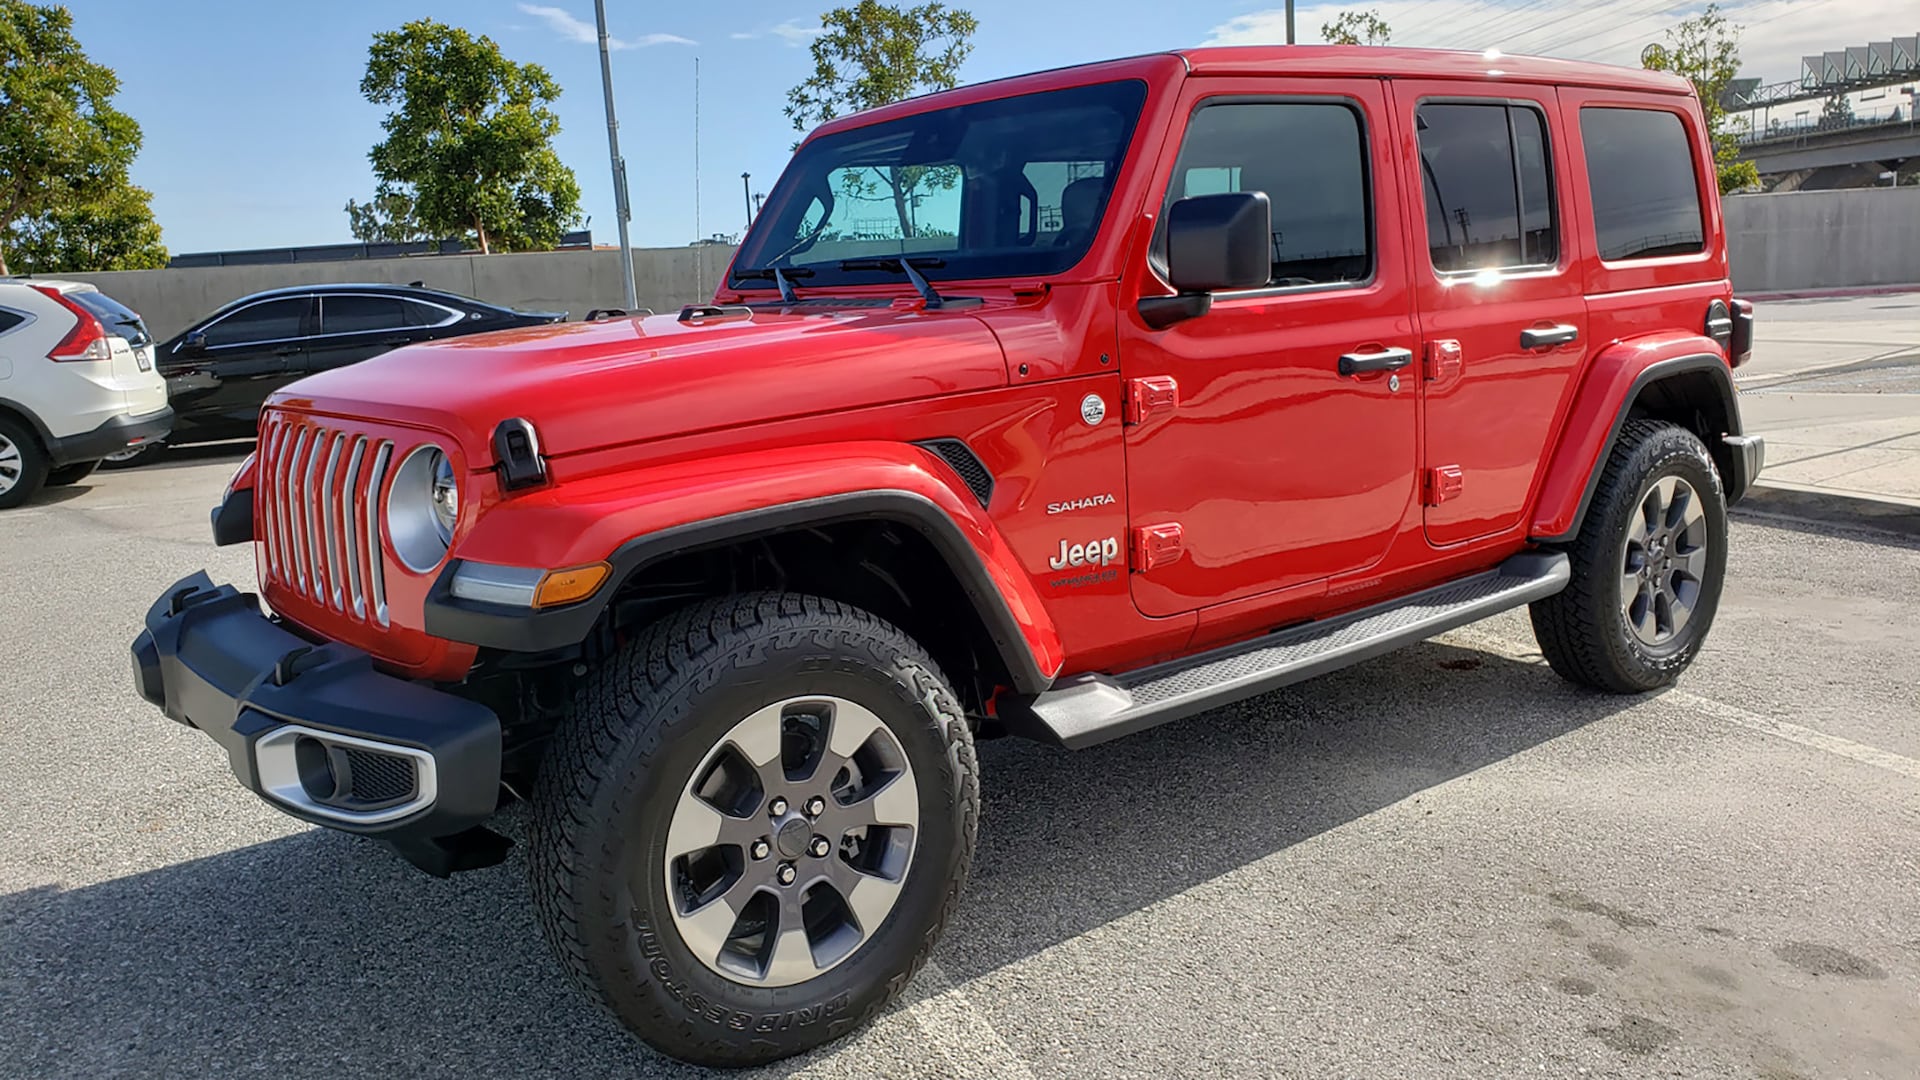 Seven Favorite Things About the 2020 Jeep Wrangler Unlimited Sahara 4x4